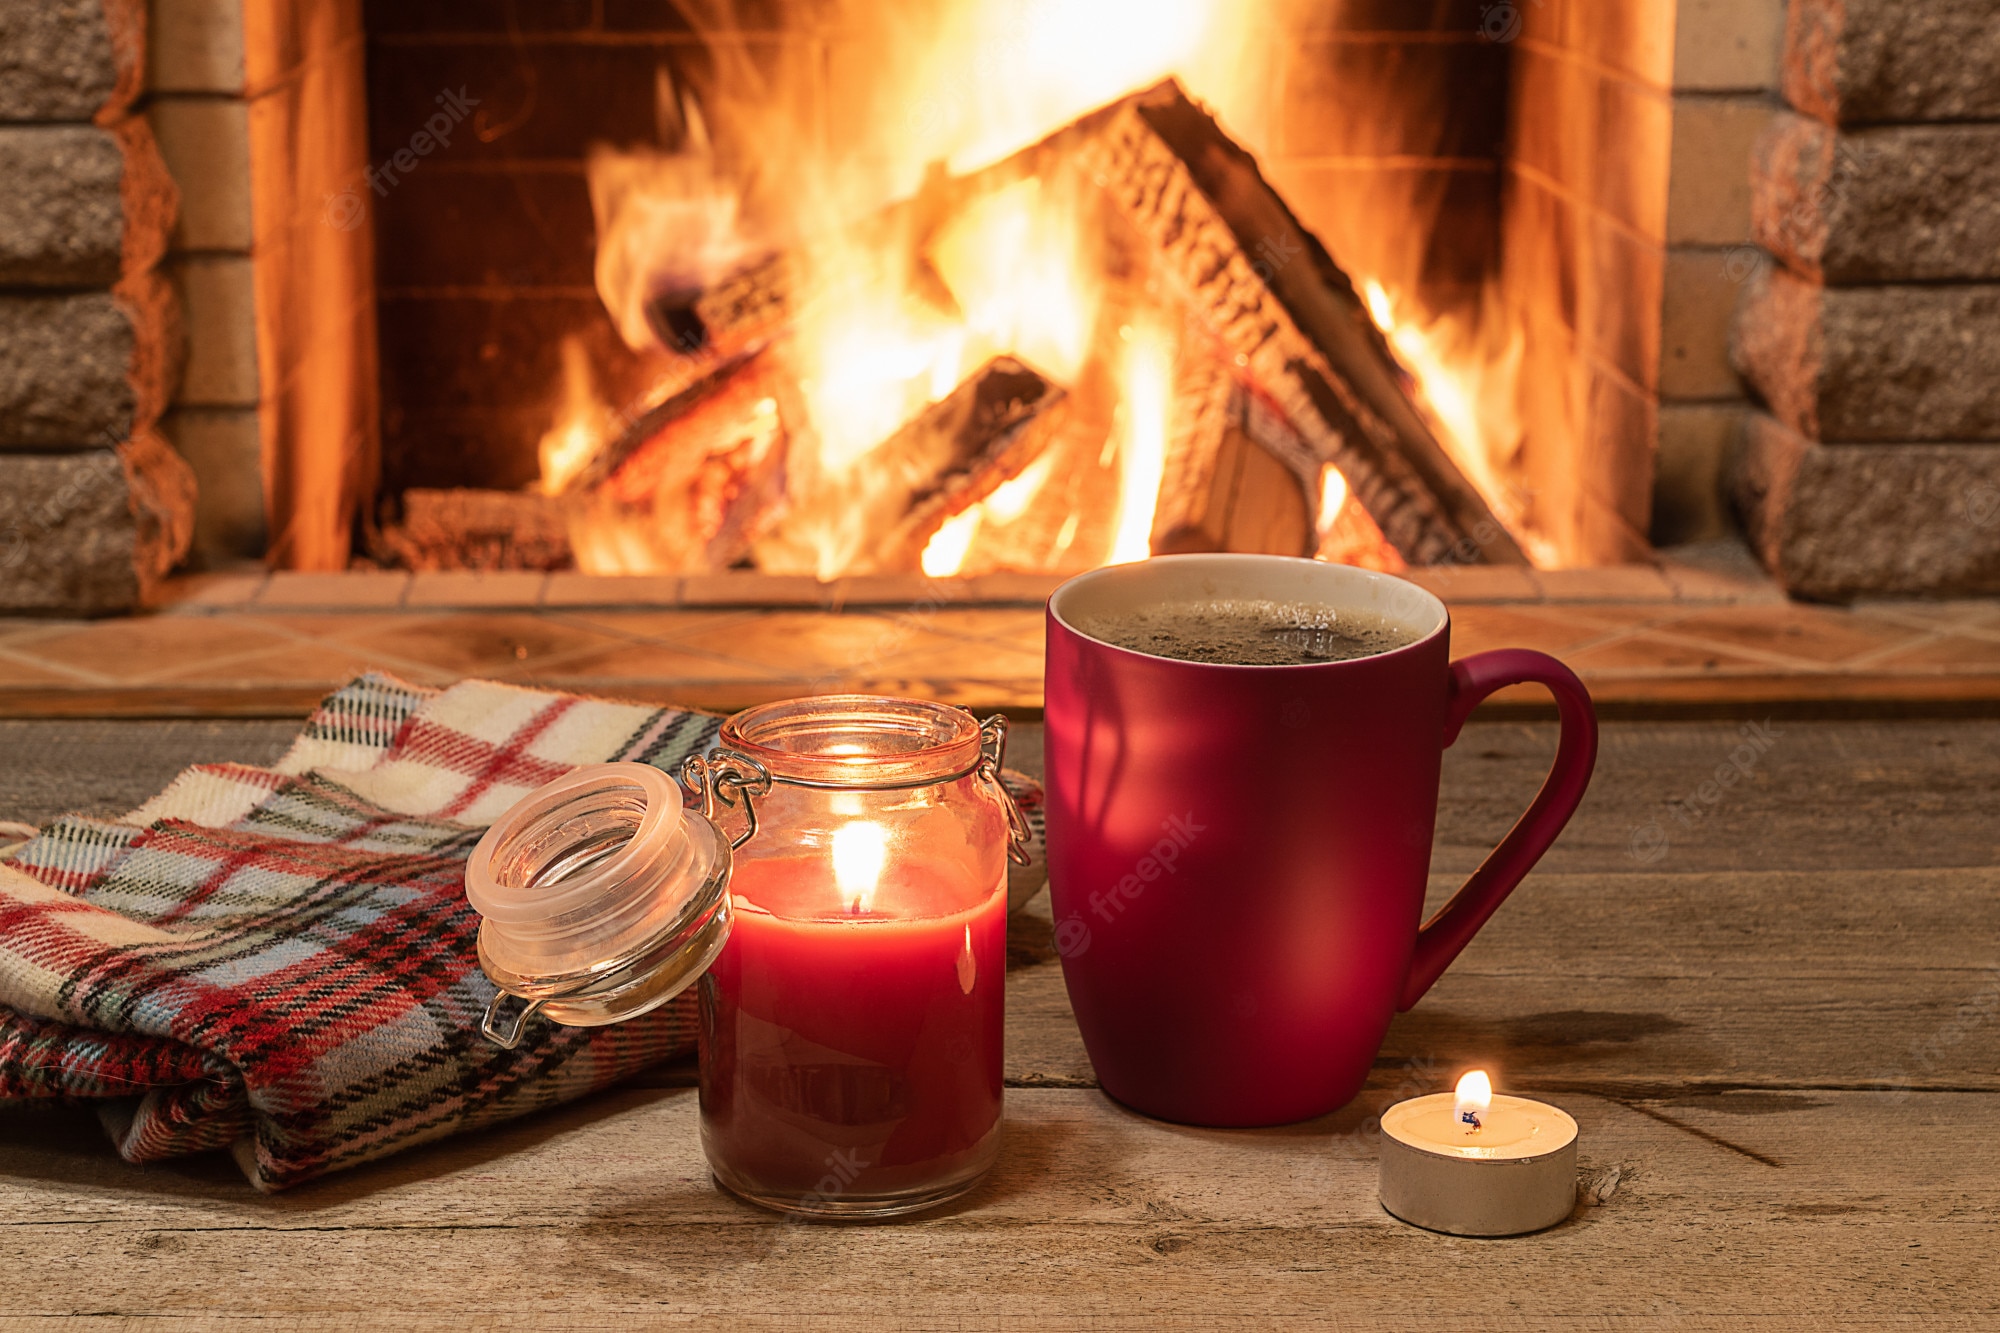 Premium Photo. Cozy scene near fireplace with mug of hot tea, warm scarf and candle